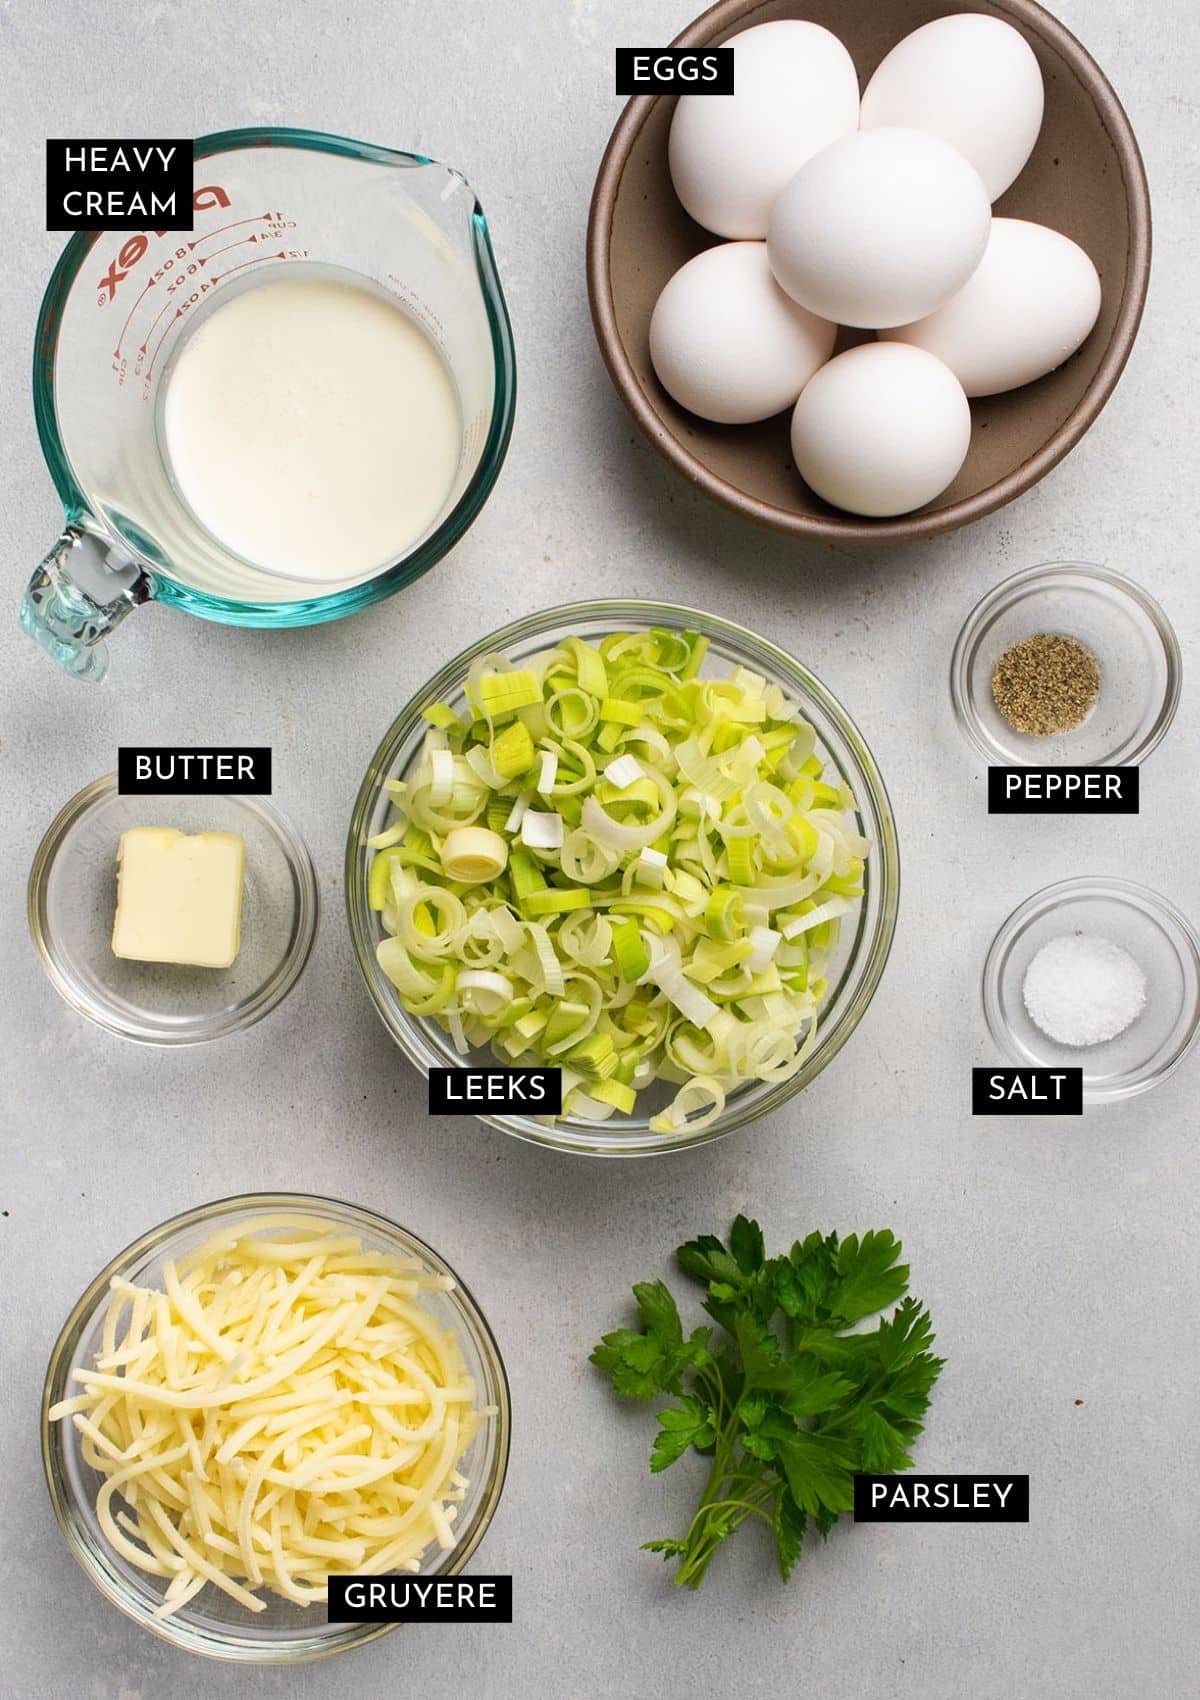 Recipe ingredients organized into individual glass bowls.